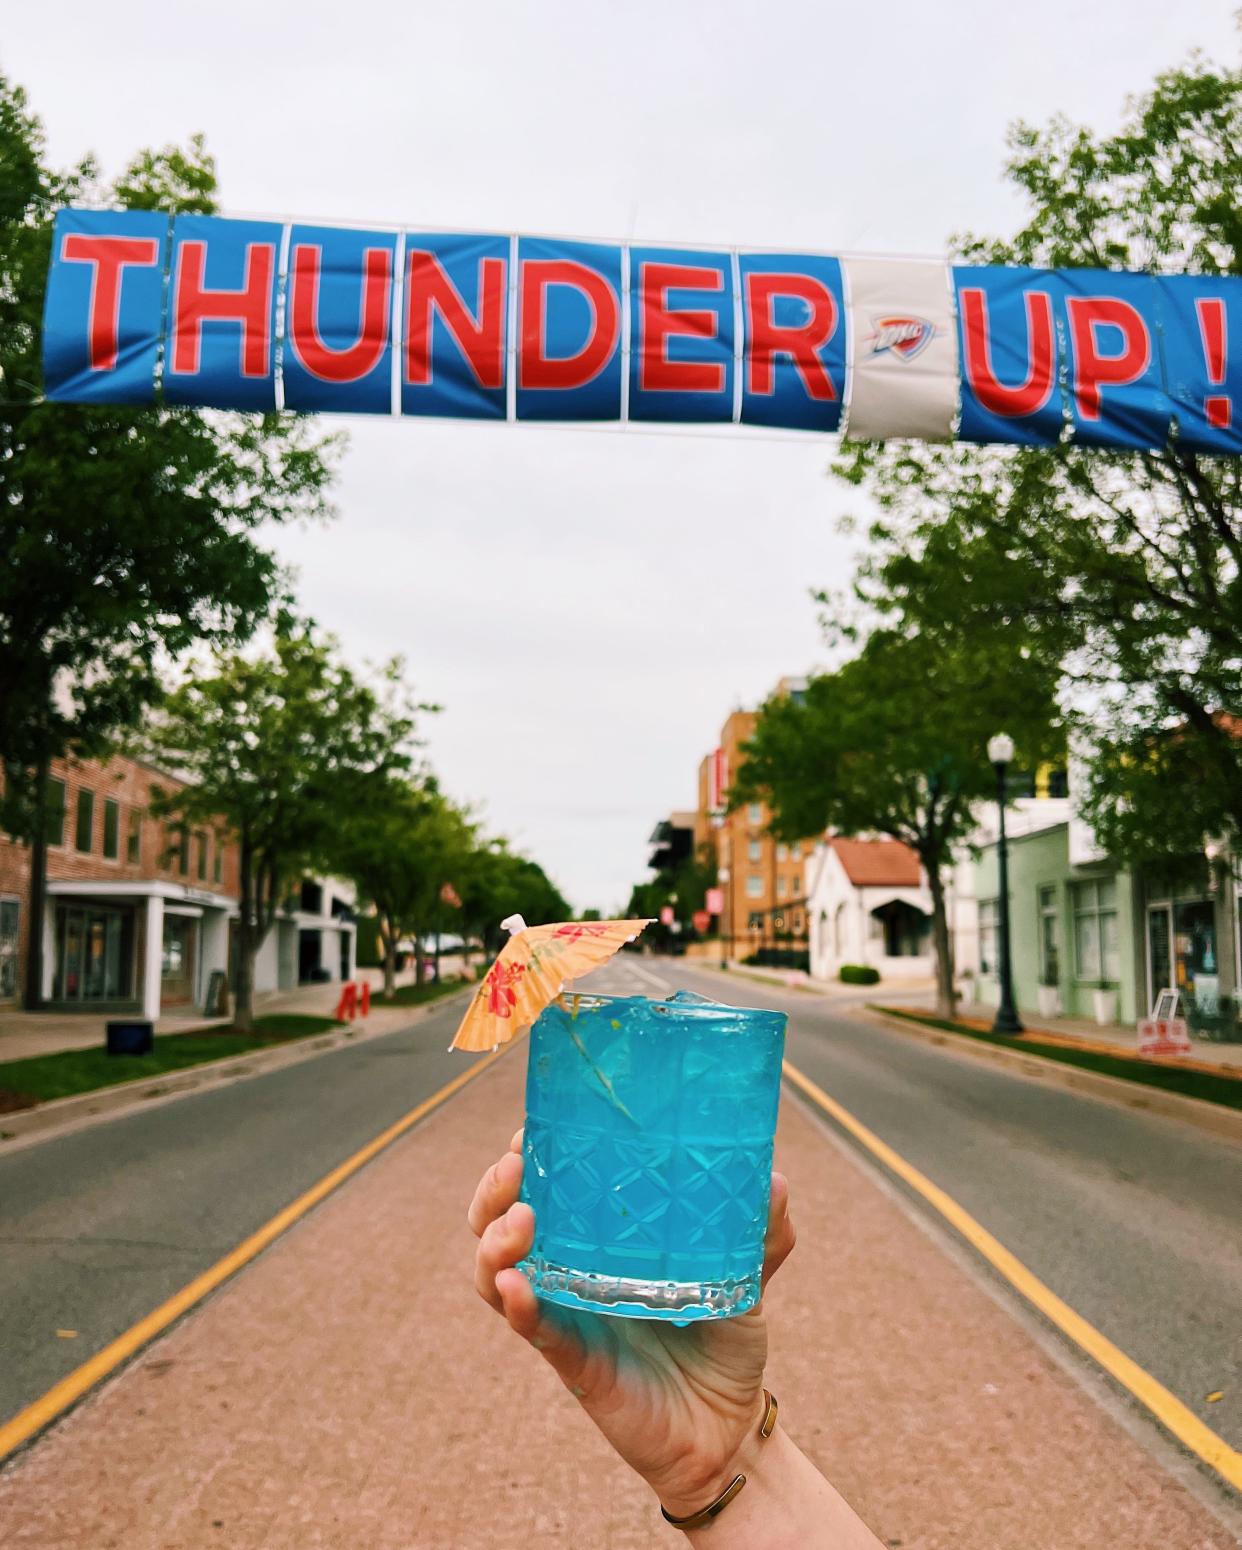 O Bar has signature drinks like the Thunder Up Margarita waiting for guests throughout the playoffs.